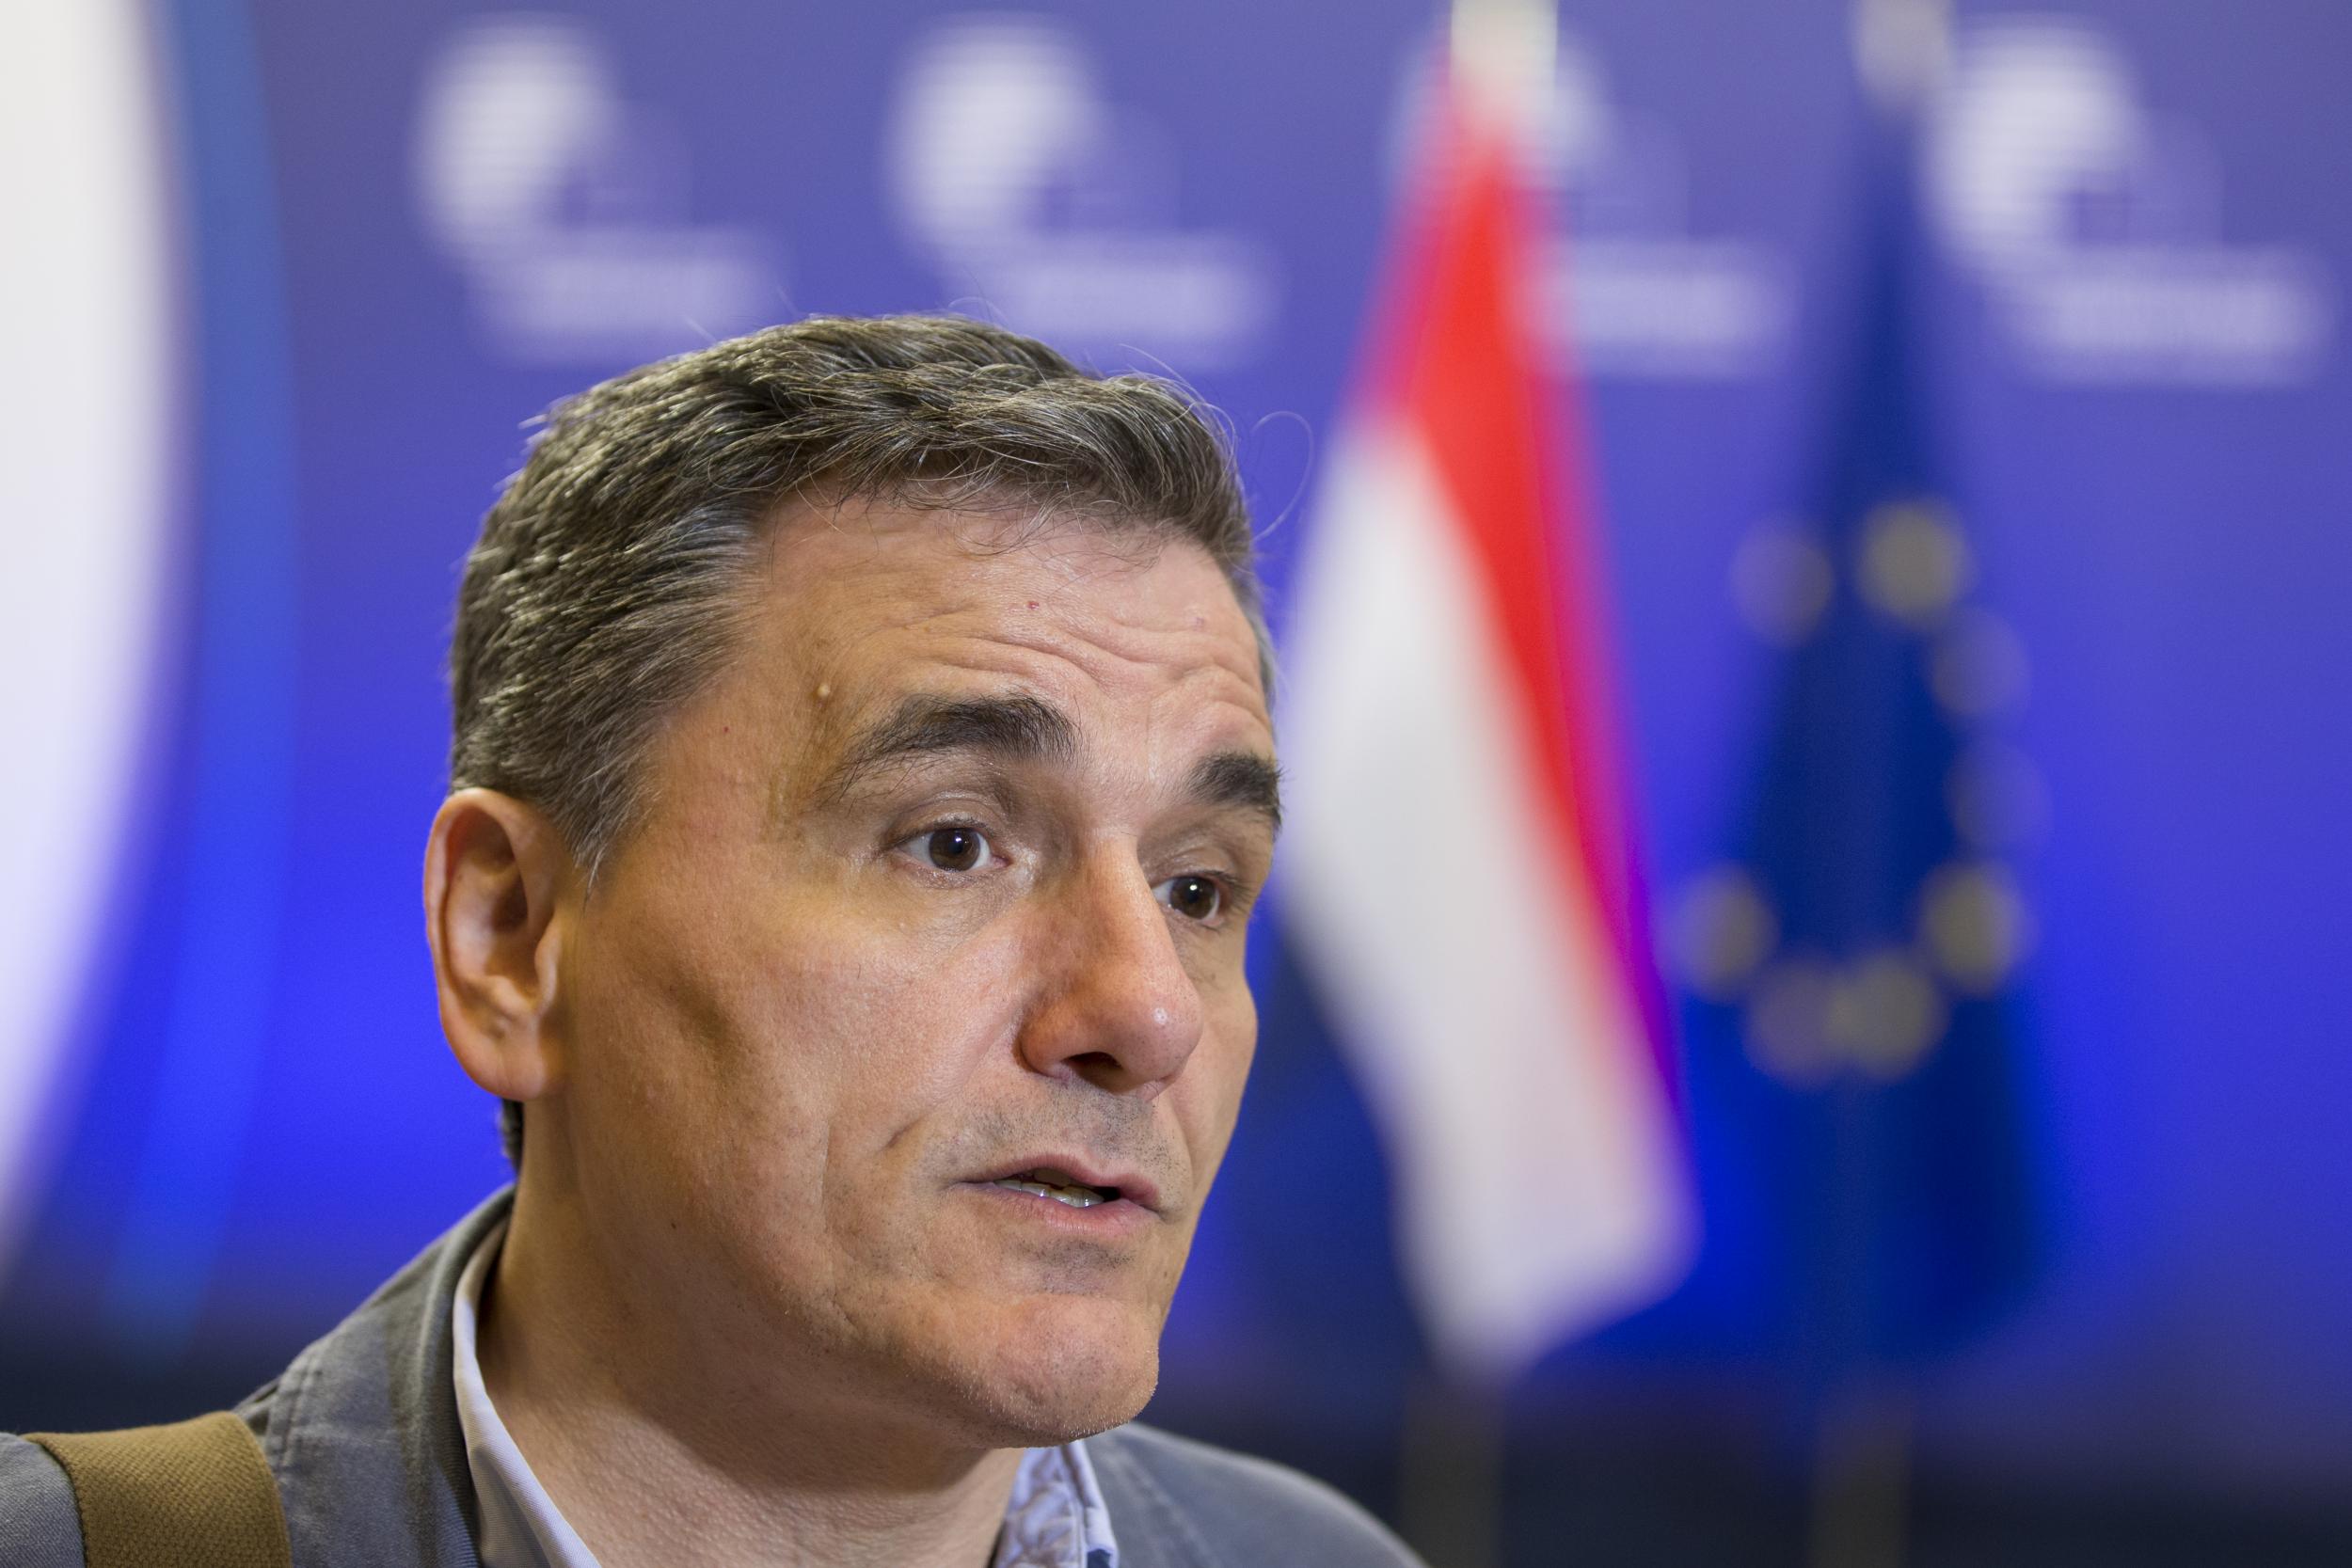 Euclid Tsakalotos, Greece's finance minister, speaks after leaving a Eurogroup meeting of European finance ministers in Brussels, Belgium, on Tuesday